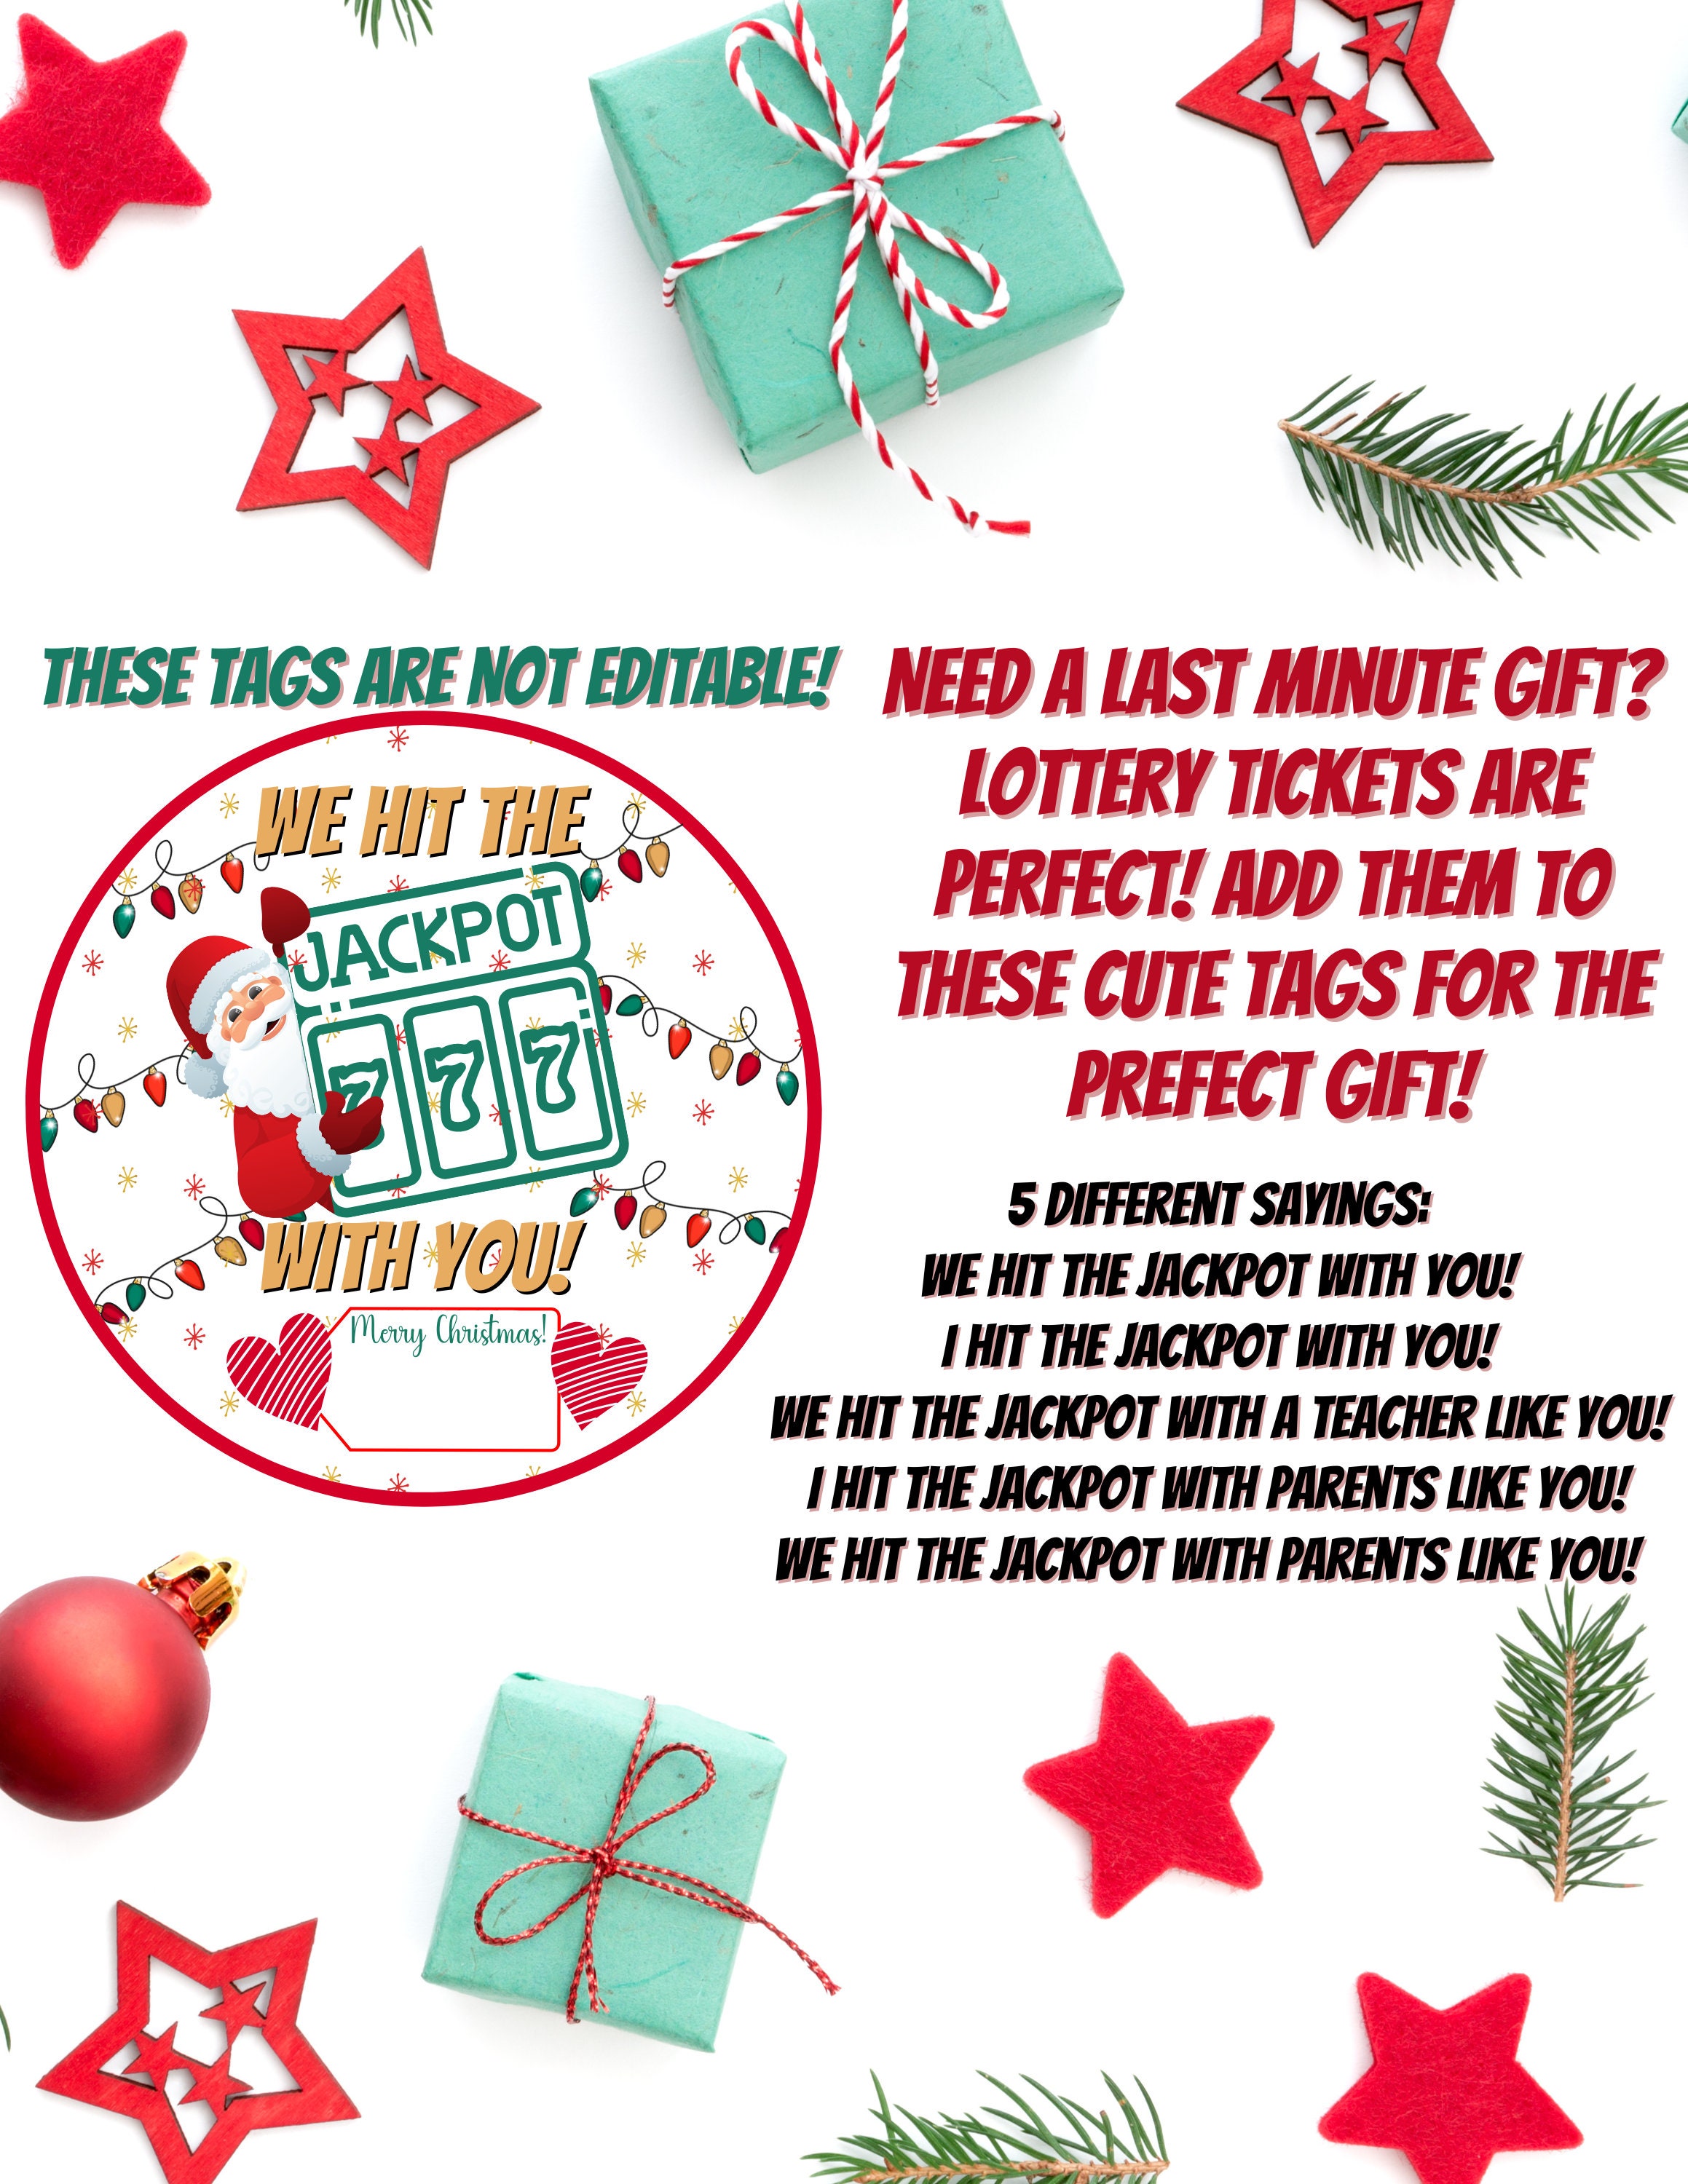 Ho Ho Dough Lottery Ticket Holders Lottery Ticket Party Favor Tags  Christmas Party Favor Tags Adult Party Favor INSTANT DOWNLOAD 